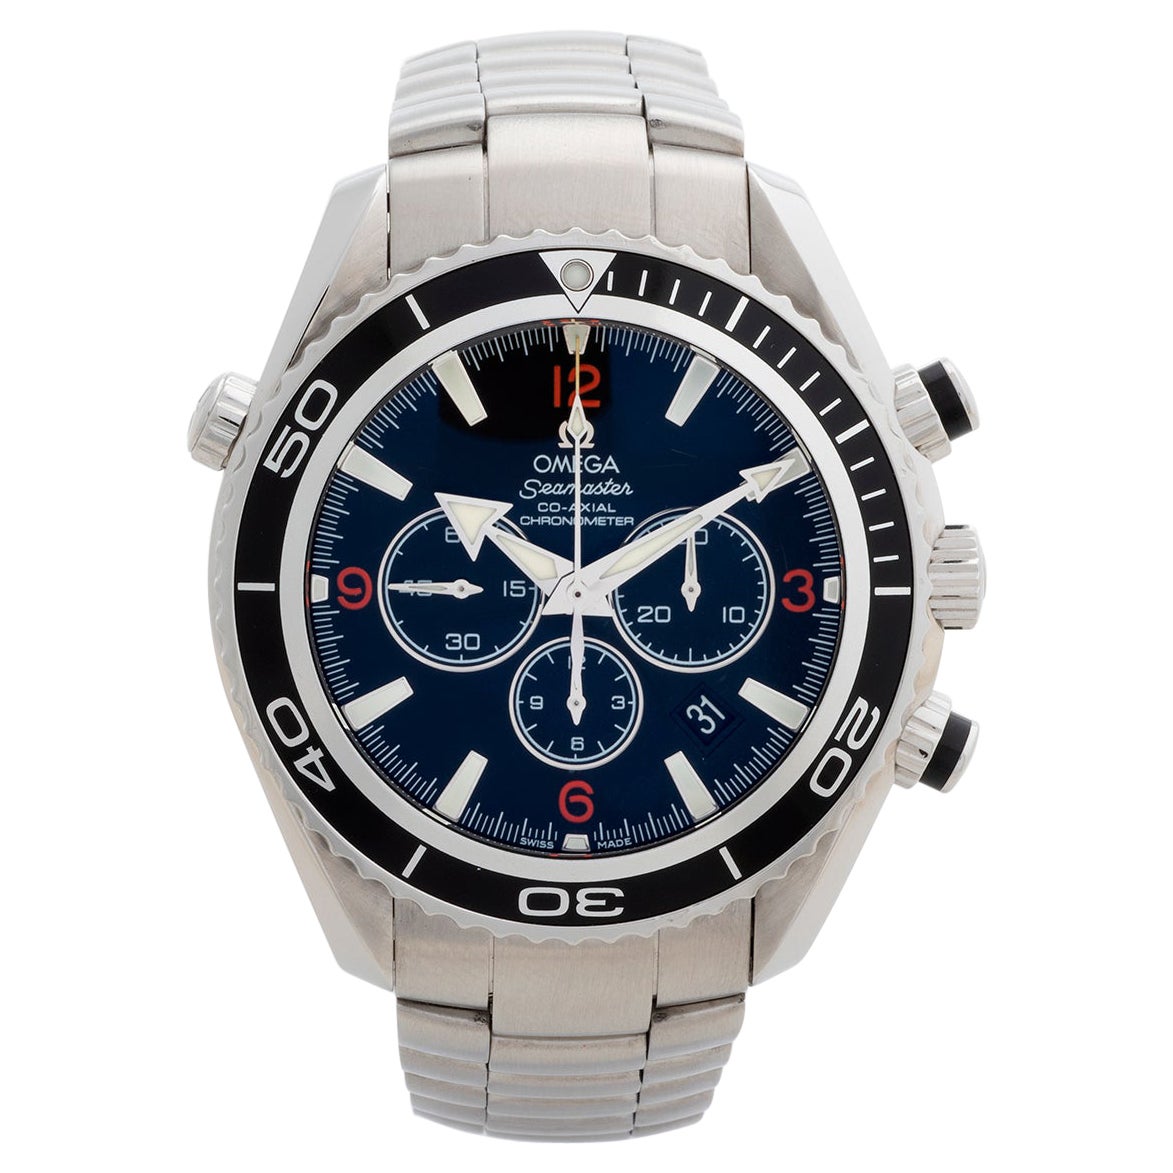 Classic Omega Seamaster Planet Ocean Chronograph with Date, Ref 2210.51.00